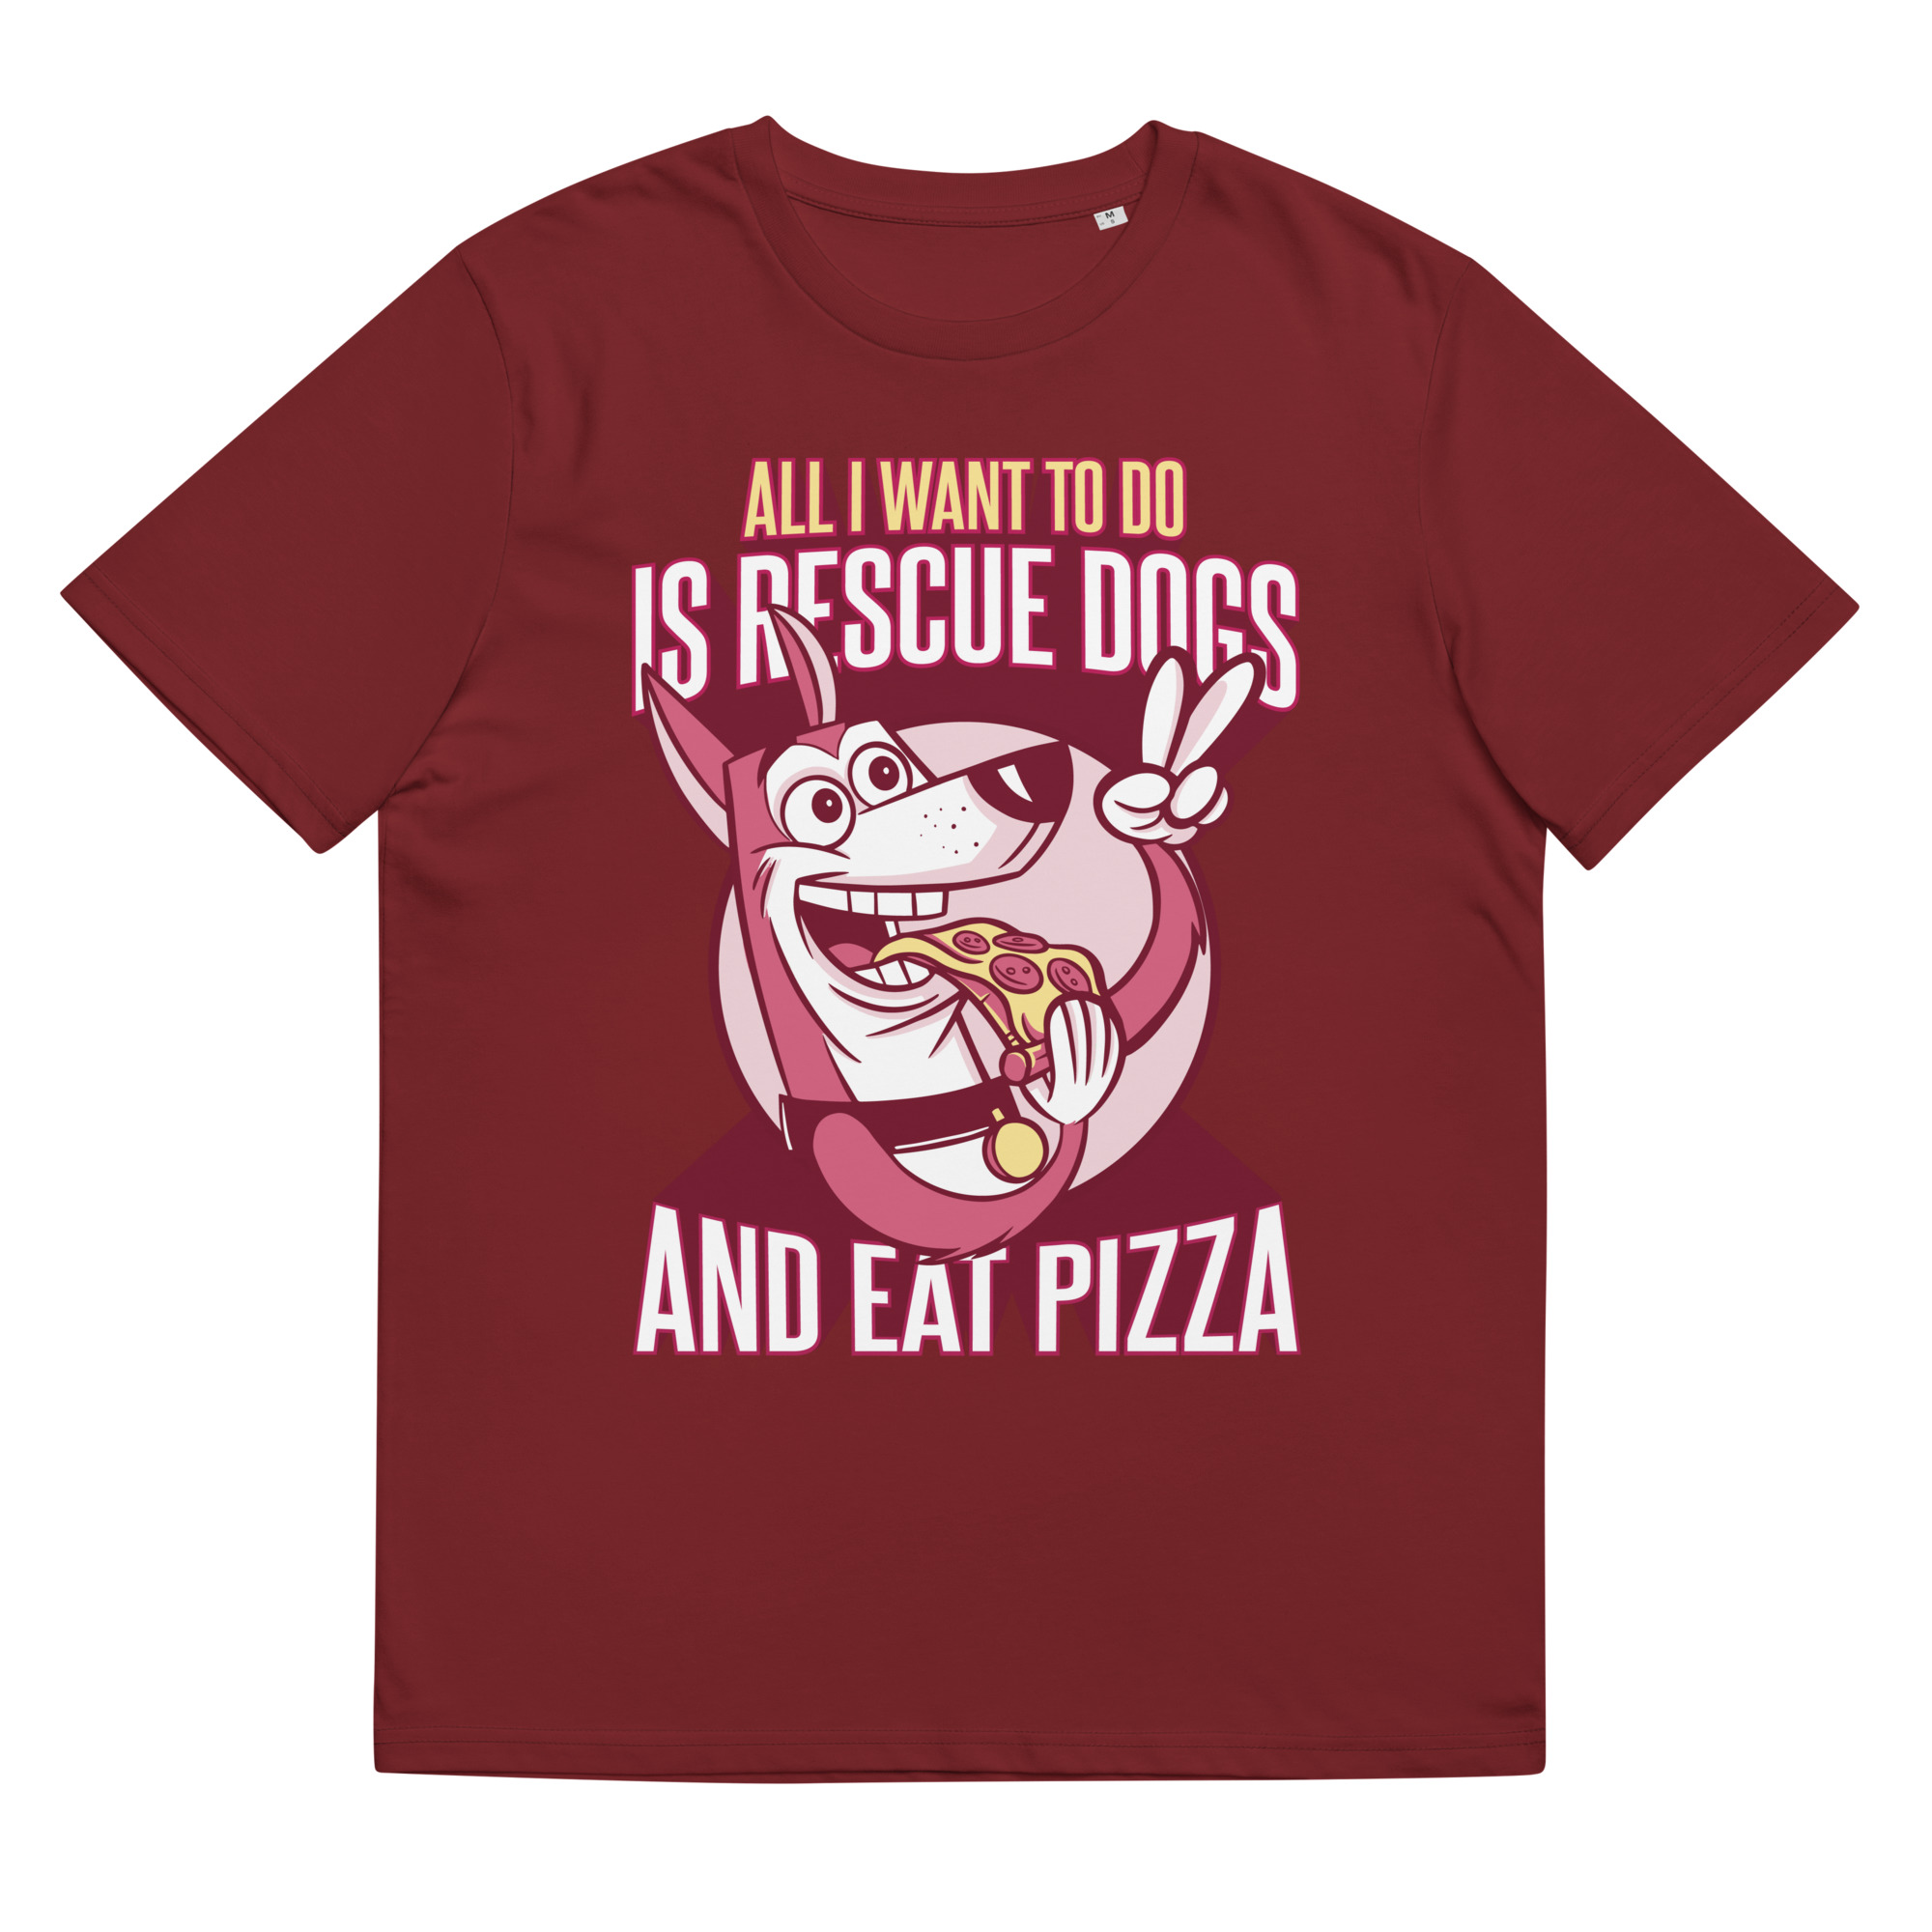 All I Want To Do Is Rescue Dogs And Eat Pizza - Organic Unisex Pizza T-Shirt